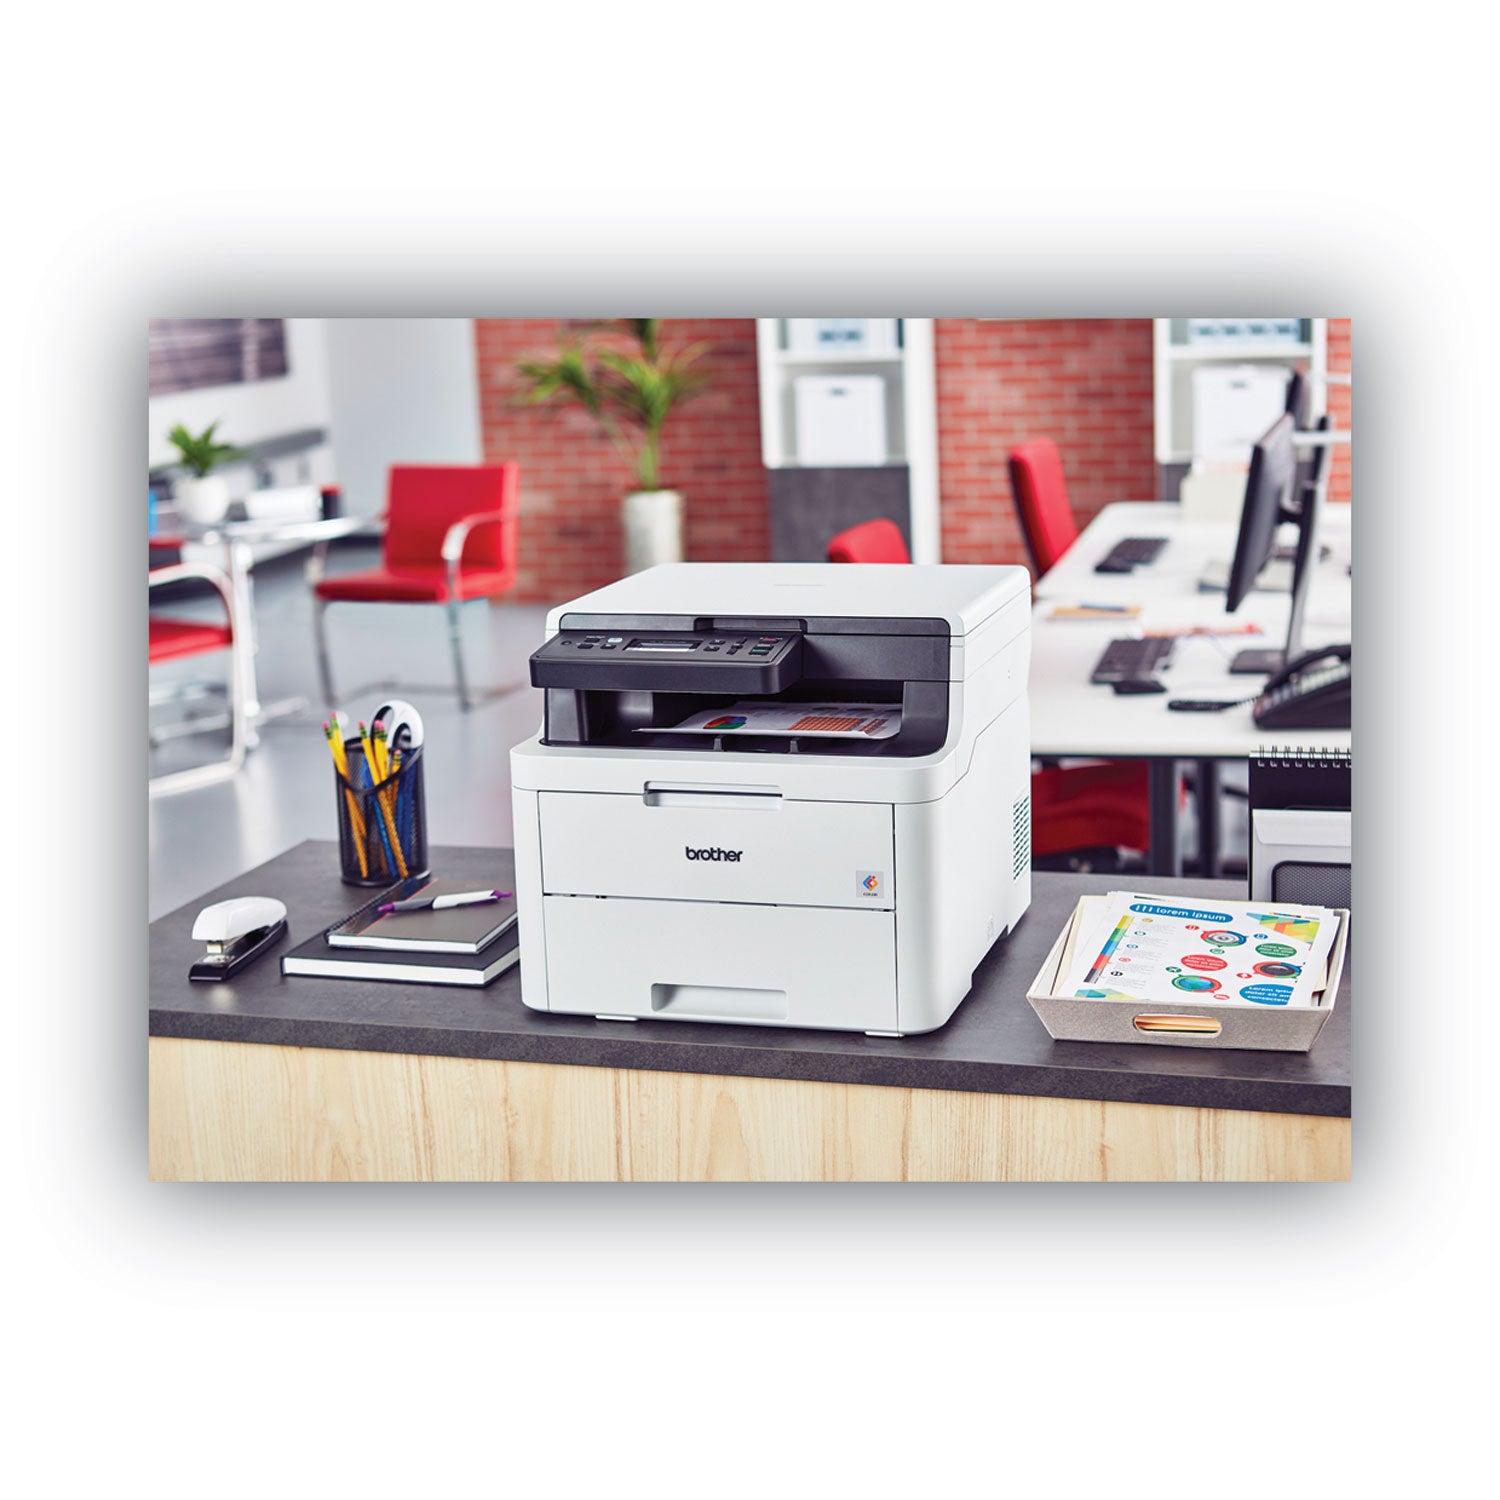 hll3290cdw-compact-digital-color-printer-with-convenient-flatbed-copy-and-scan-plus-wireless-and-duplex-printing_brthll3290cdw - 4